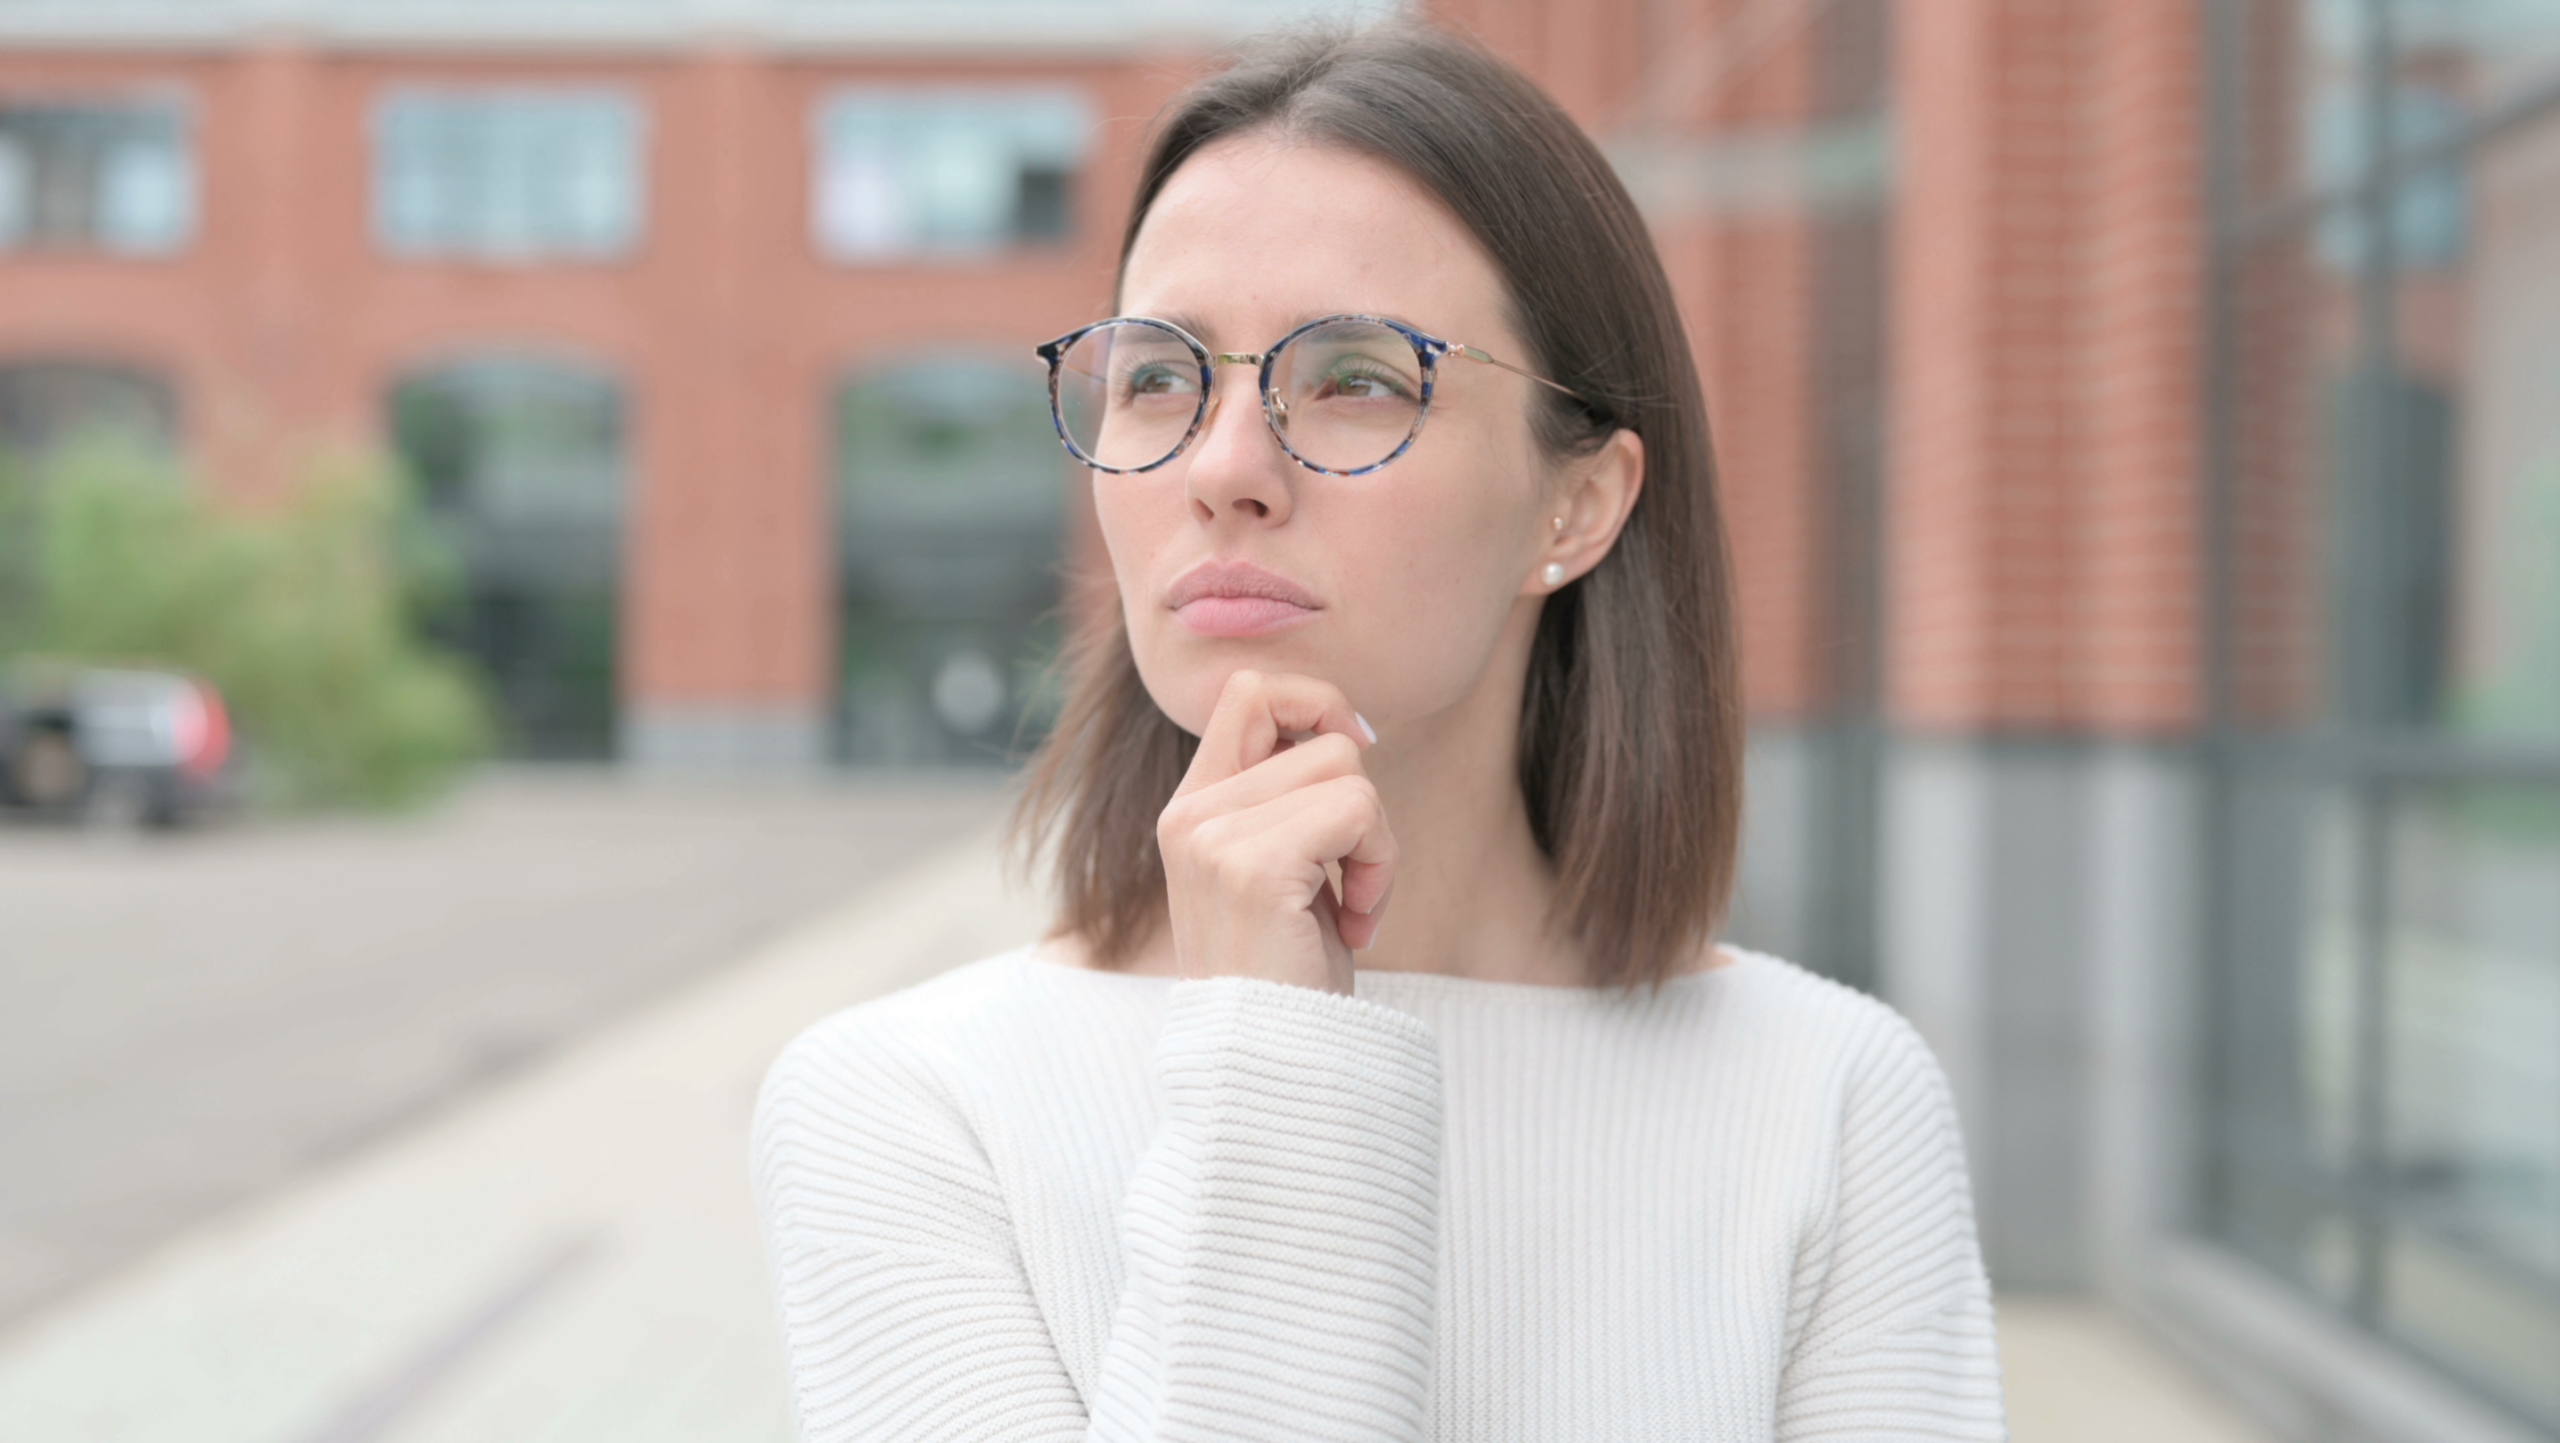 Screenshot of stock footage item. Close up of a white woman with her hand on her chin looking pensively away from the camera. She is wearing glasses and a white jumper.